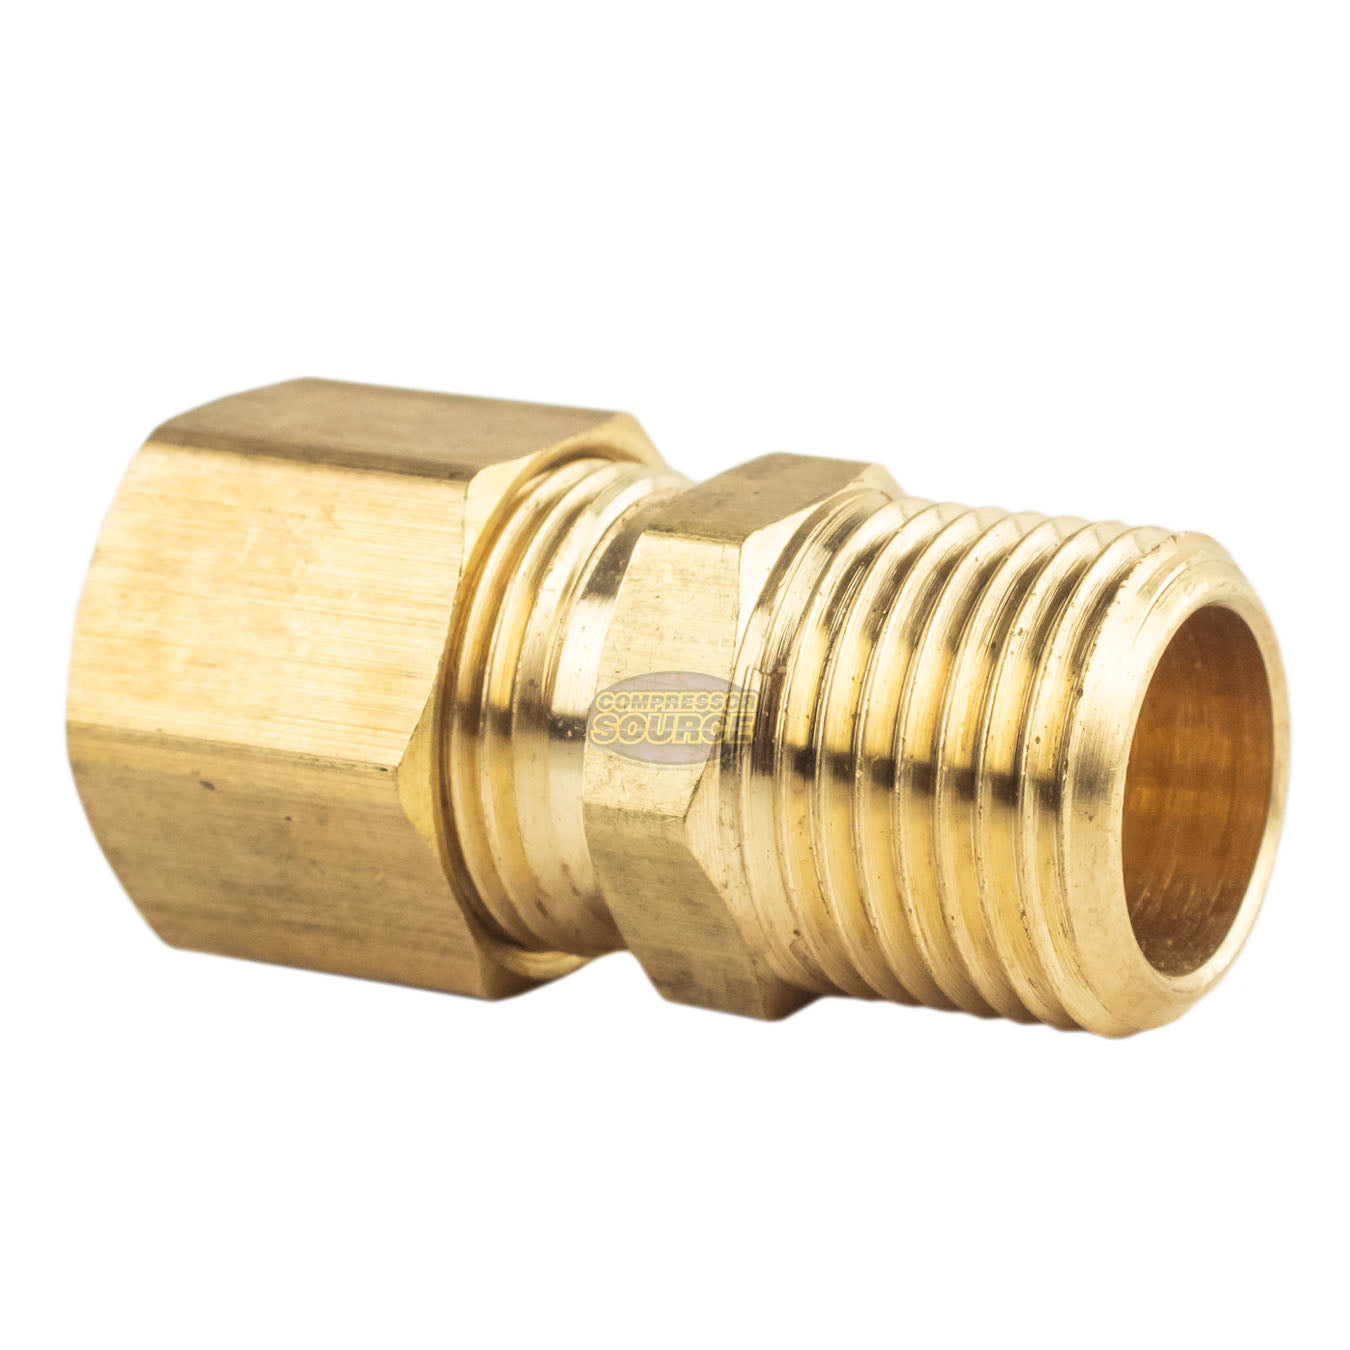 1/4 in. Tube OD x3/16 in. Tube OD - Reducing Union - Brass Compression  Fitting